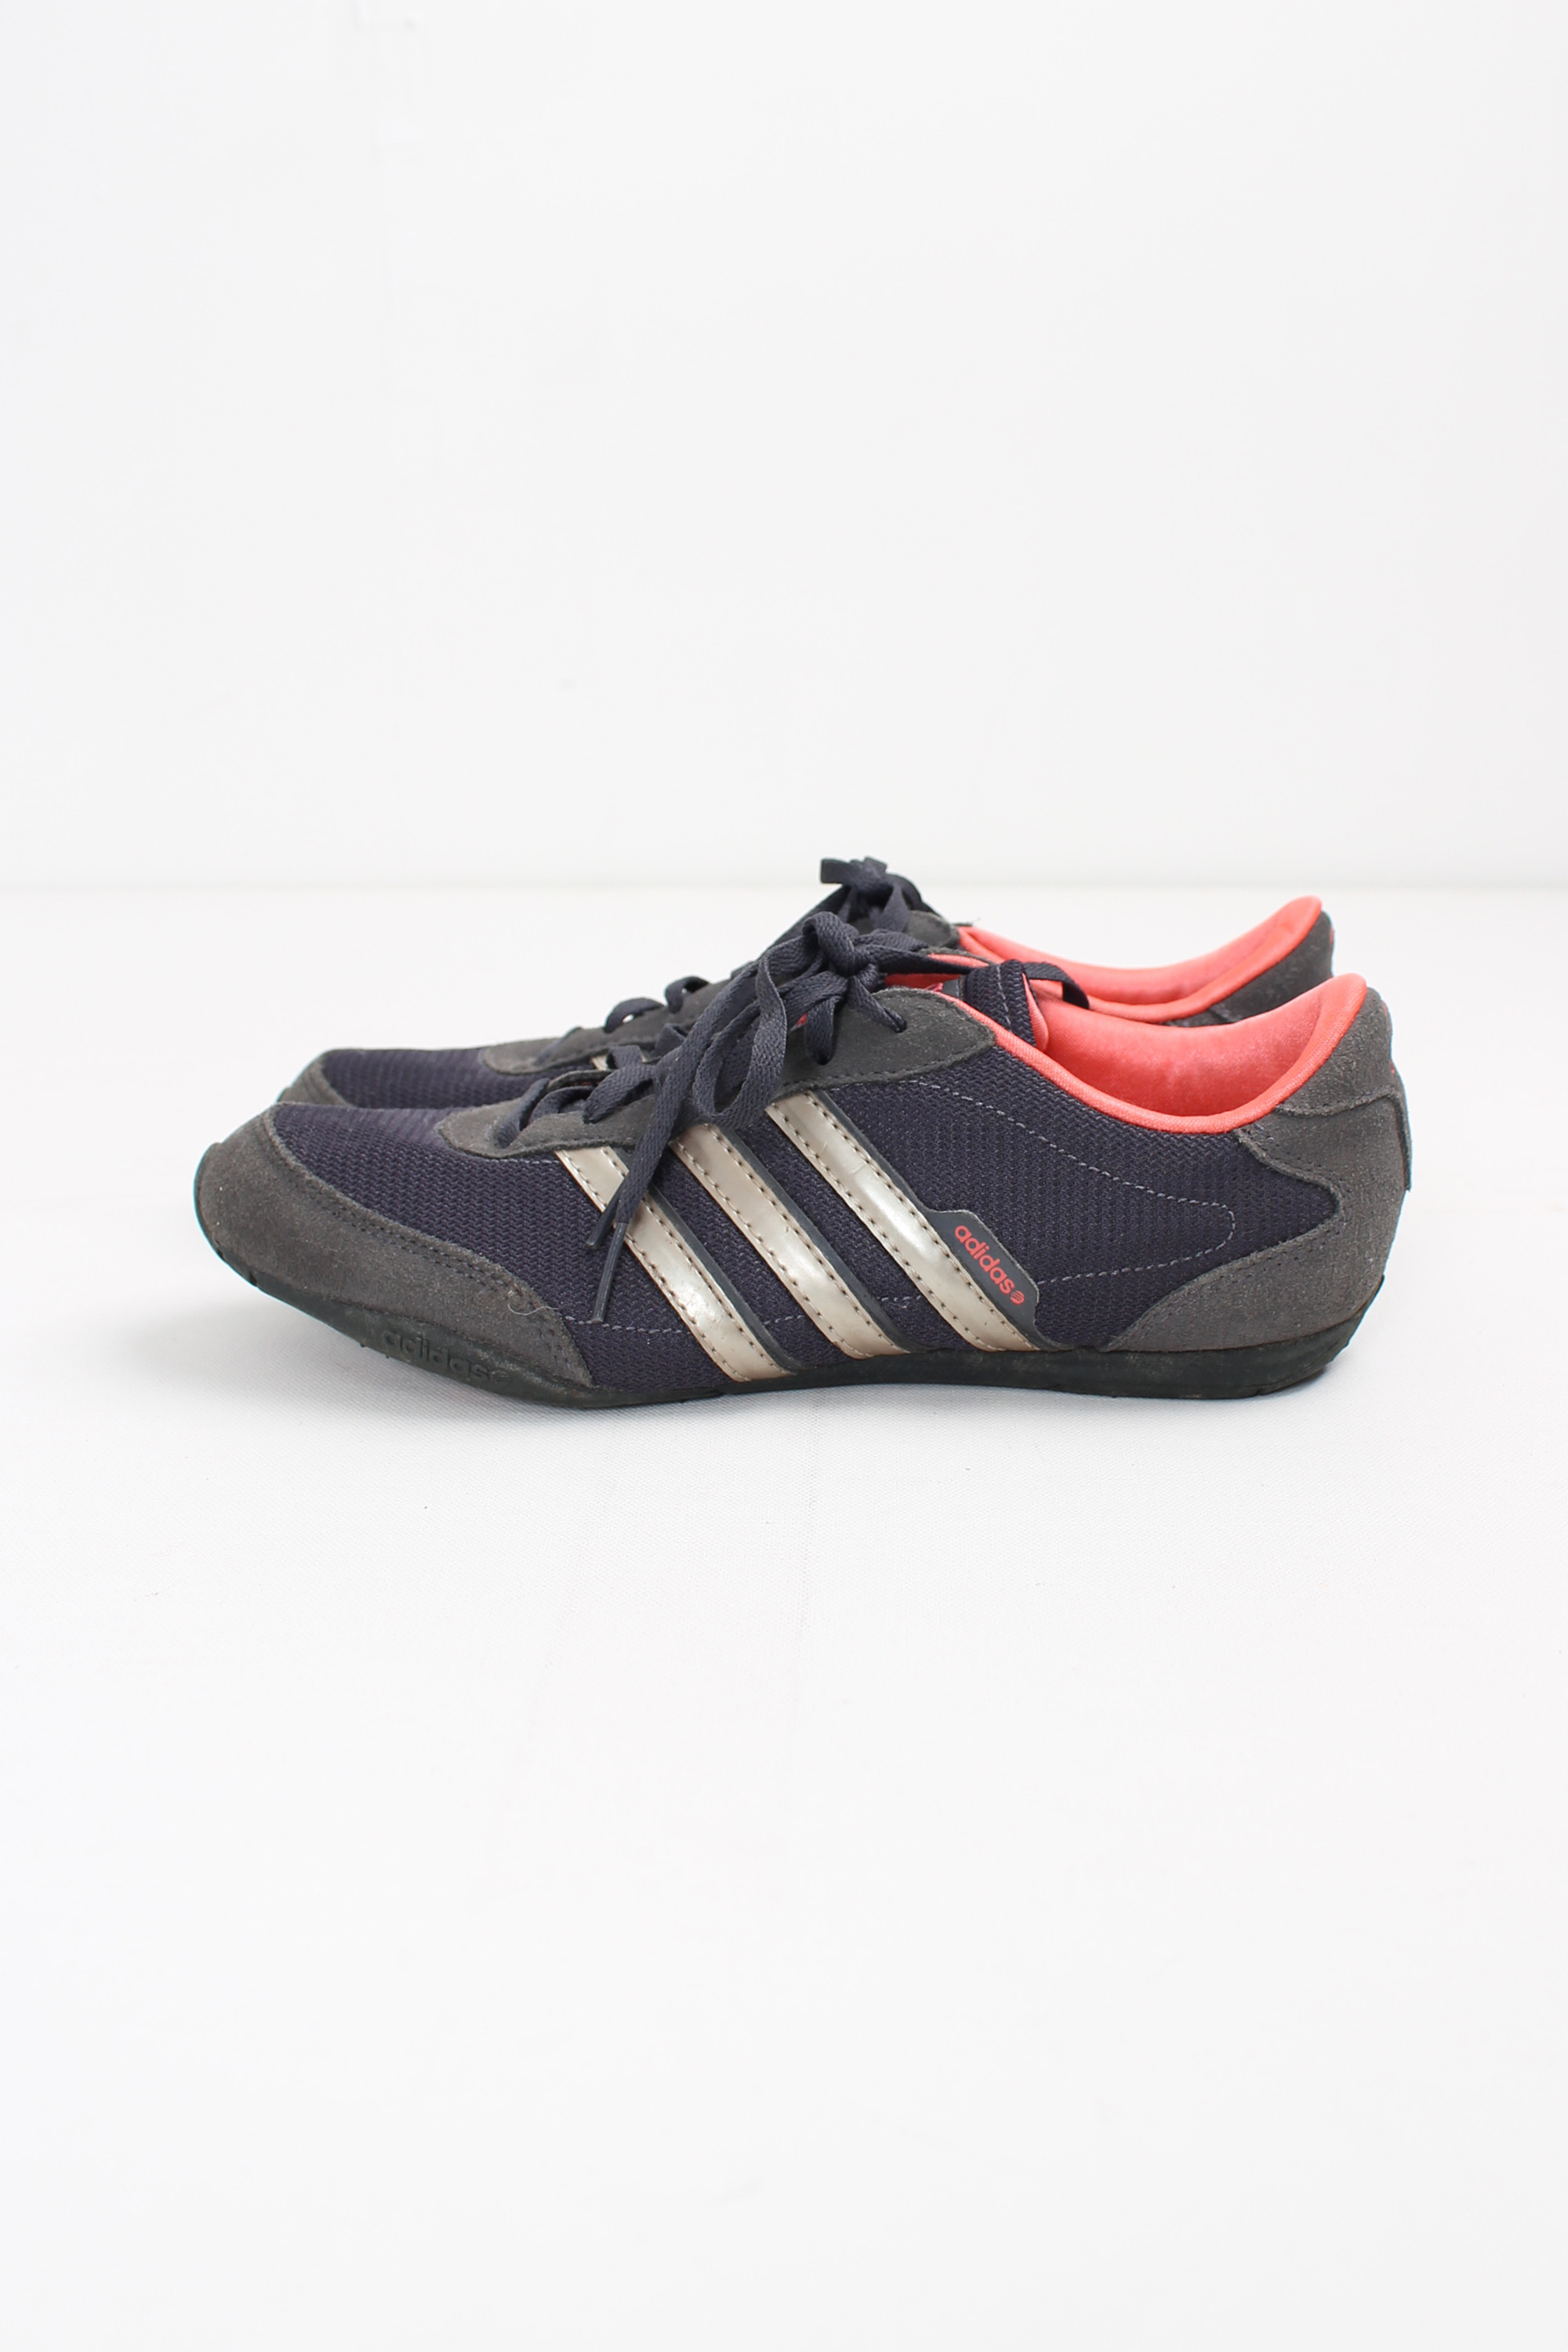 adidas NEO LABEL shoes